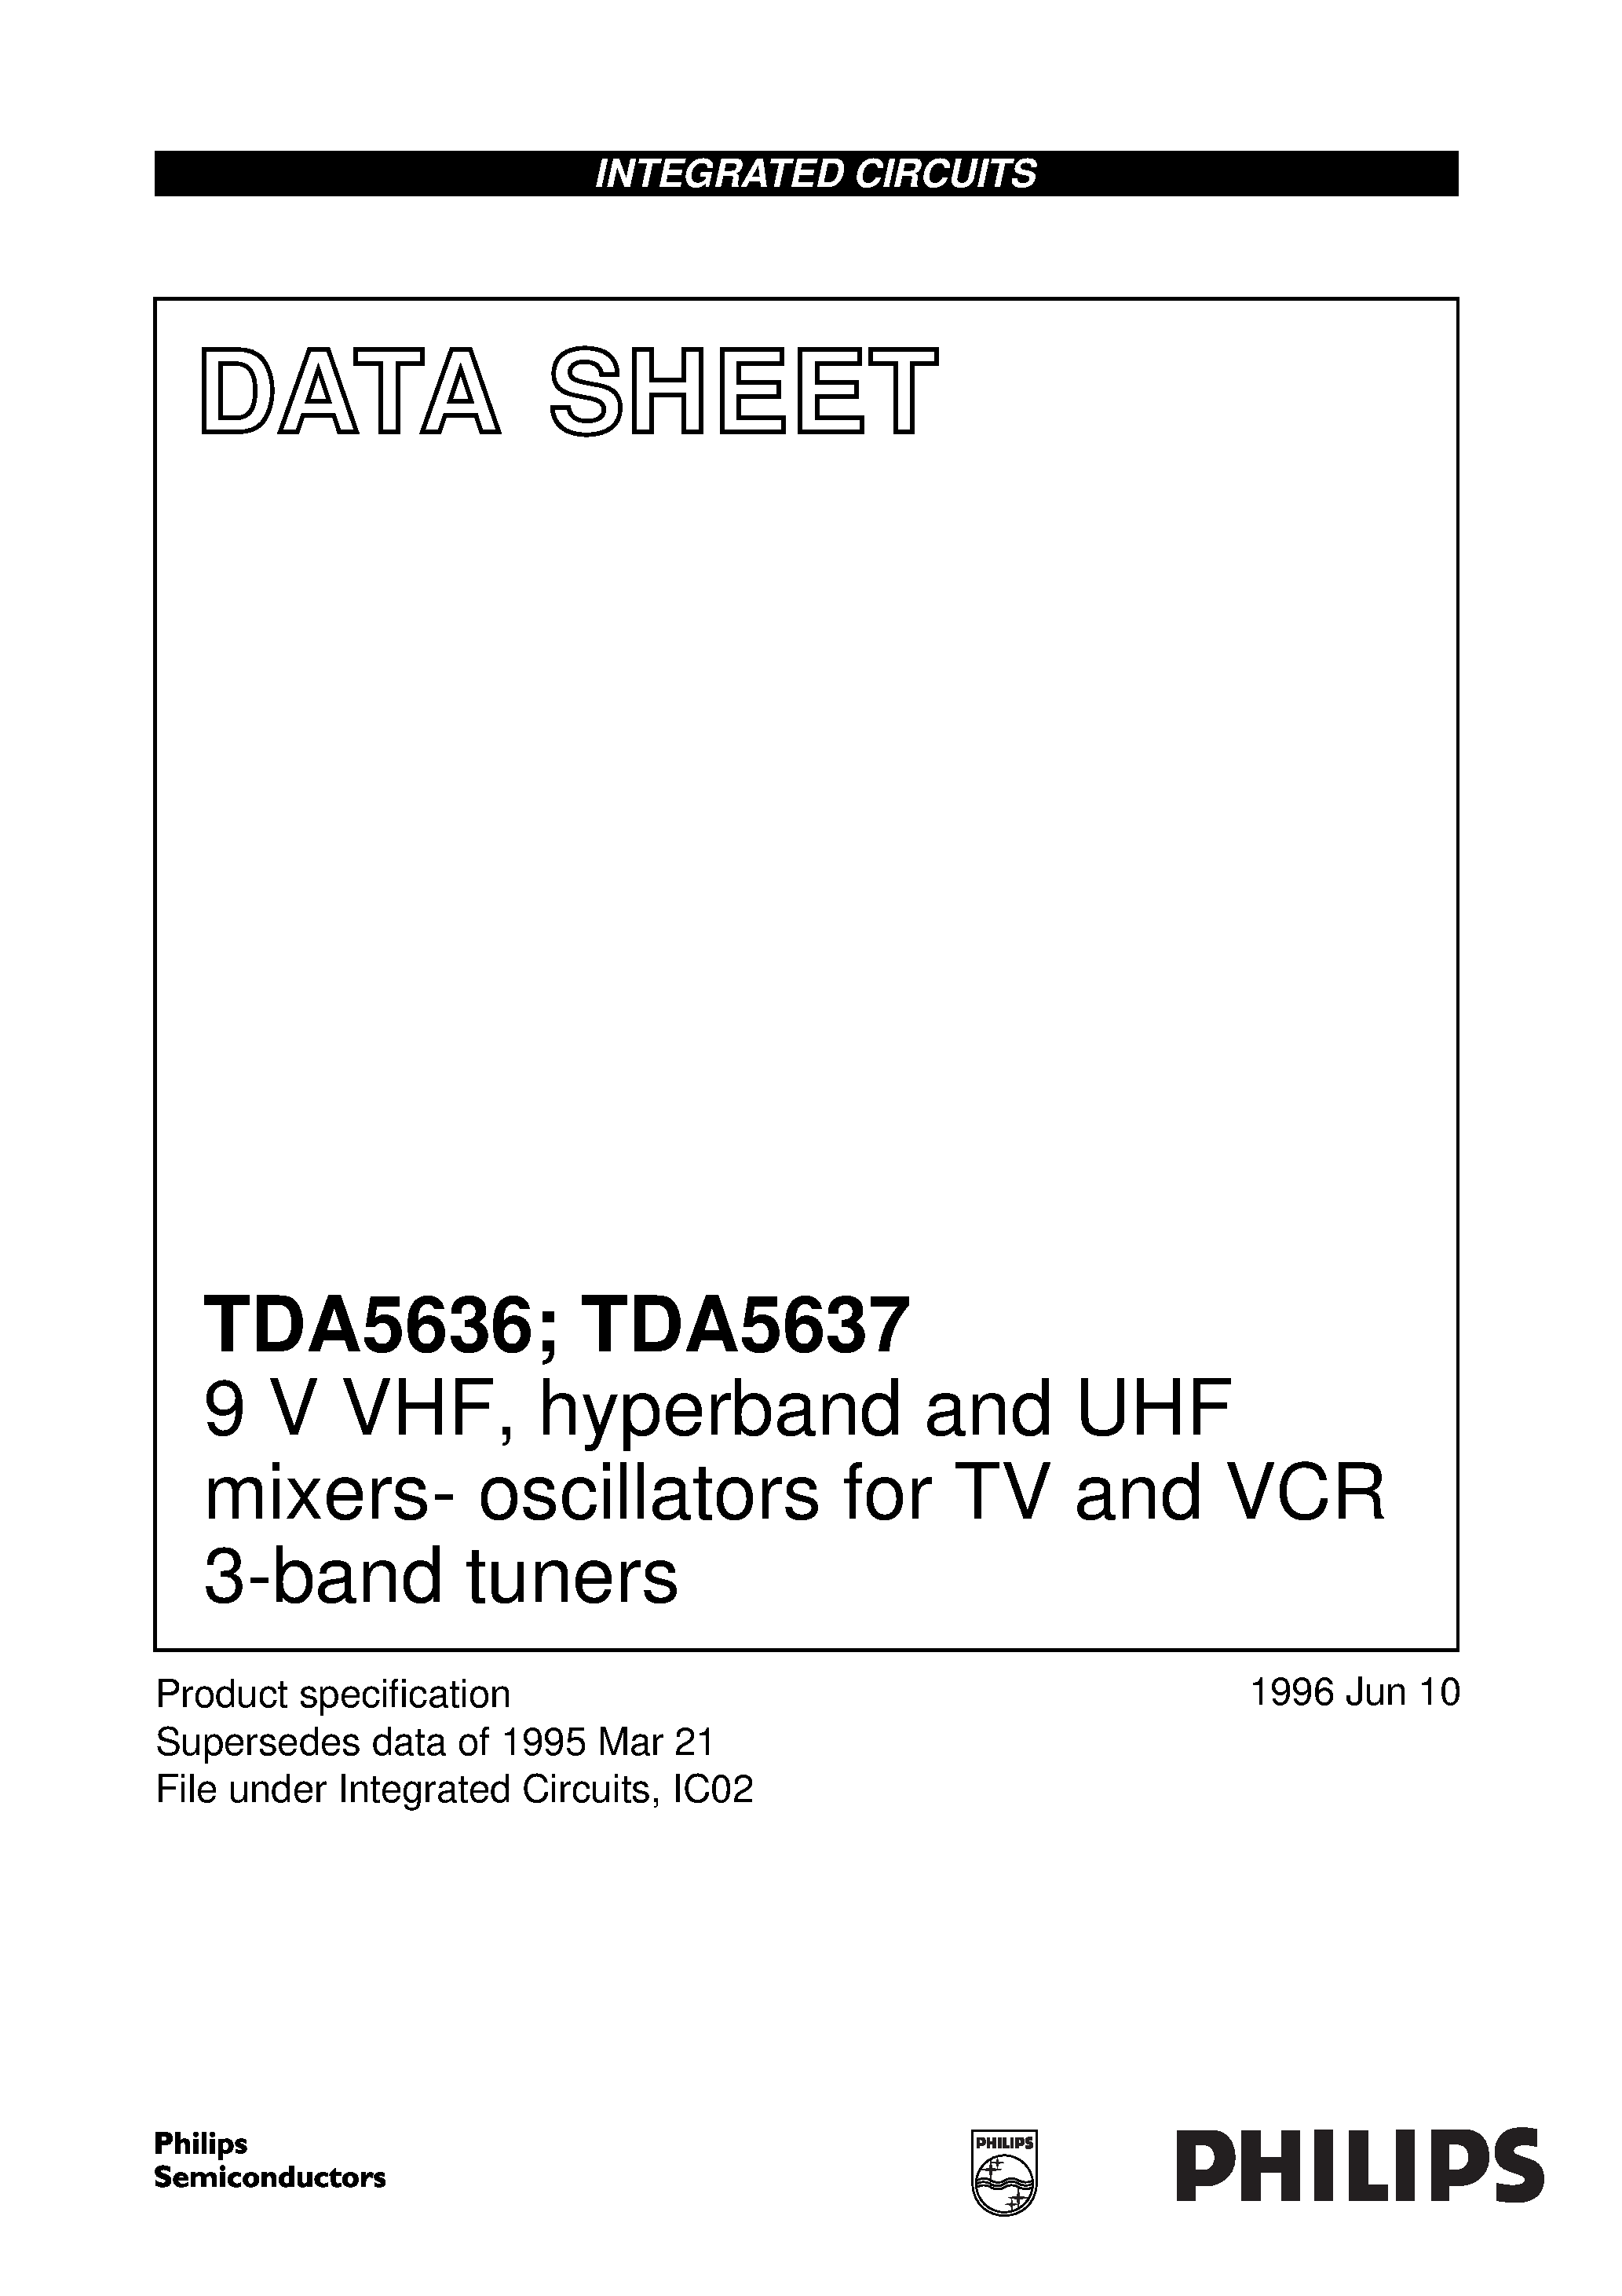 Даташит TDA5637M - 9 V VHF/ hyperband and UHF mixers- oscillators for TV and VCR 3-band tuners страница 1